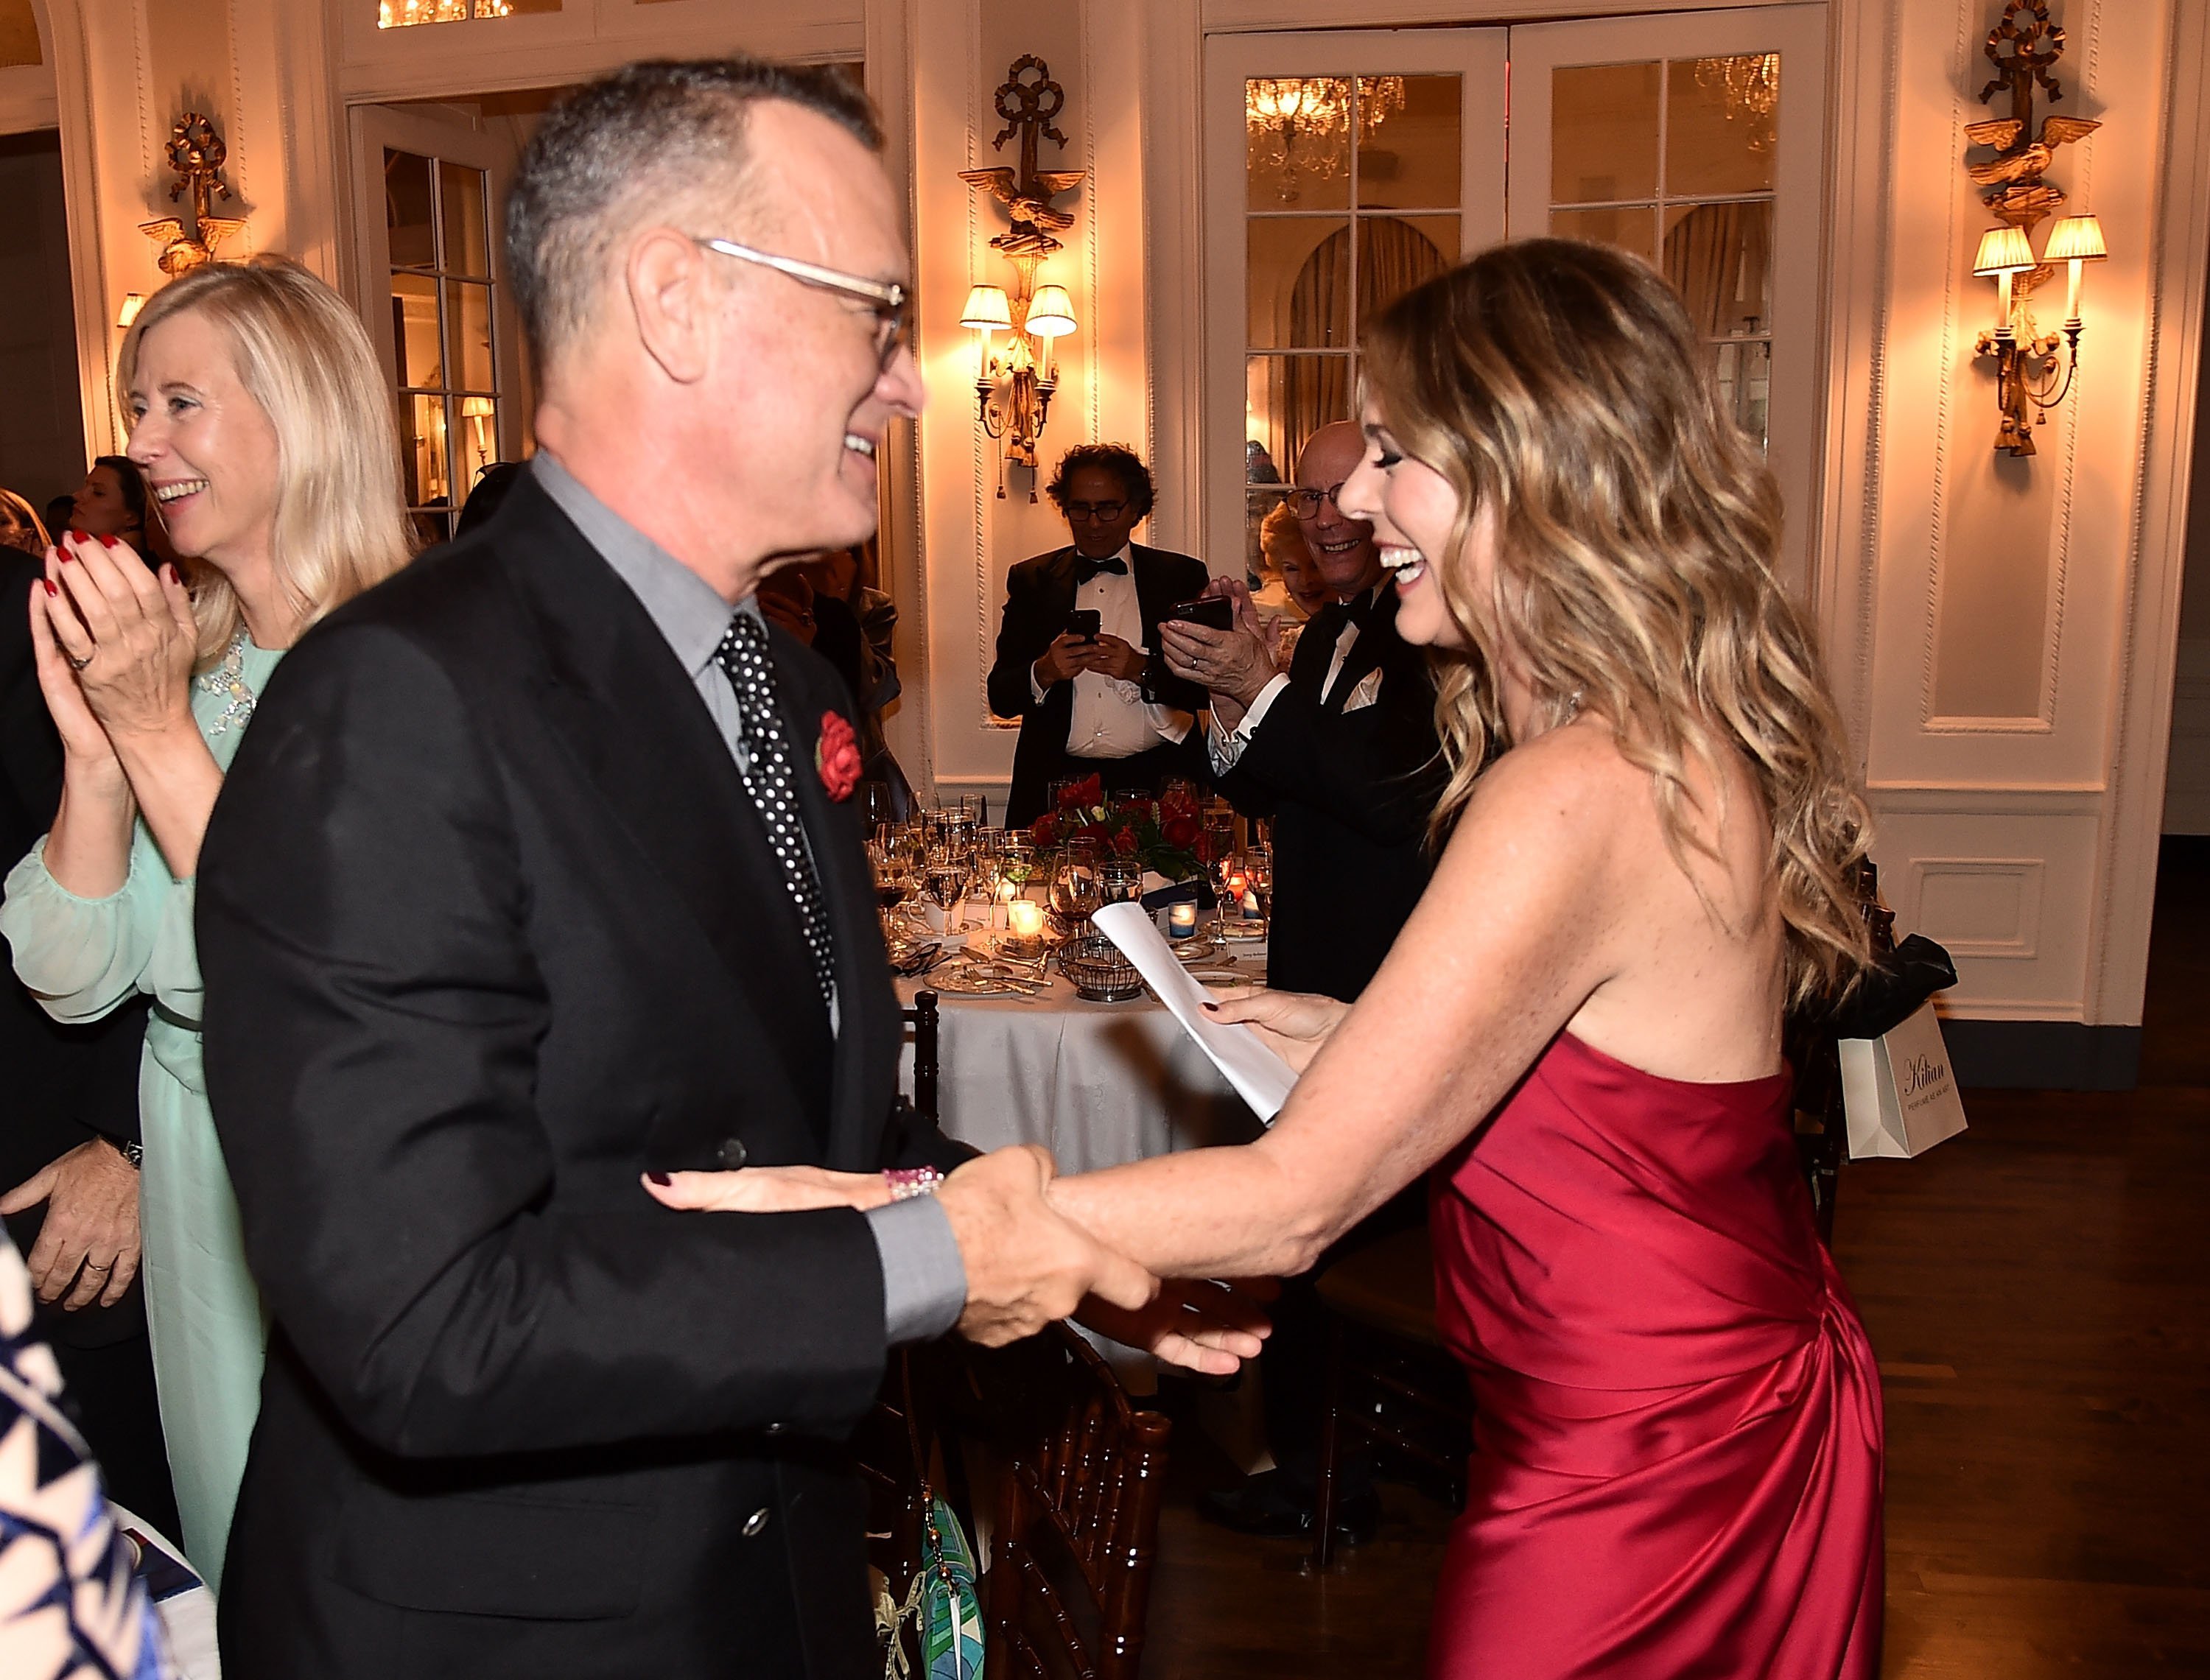 Tom Hanks and Rita Wilson attend the 2018 American Friends of Blerancourt Dinner in New York City on November 9, 2018 | Photo: Getty Images